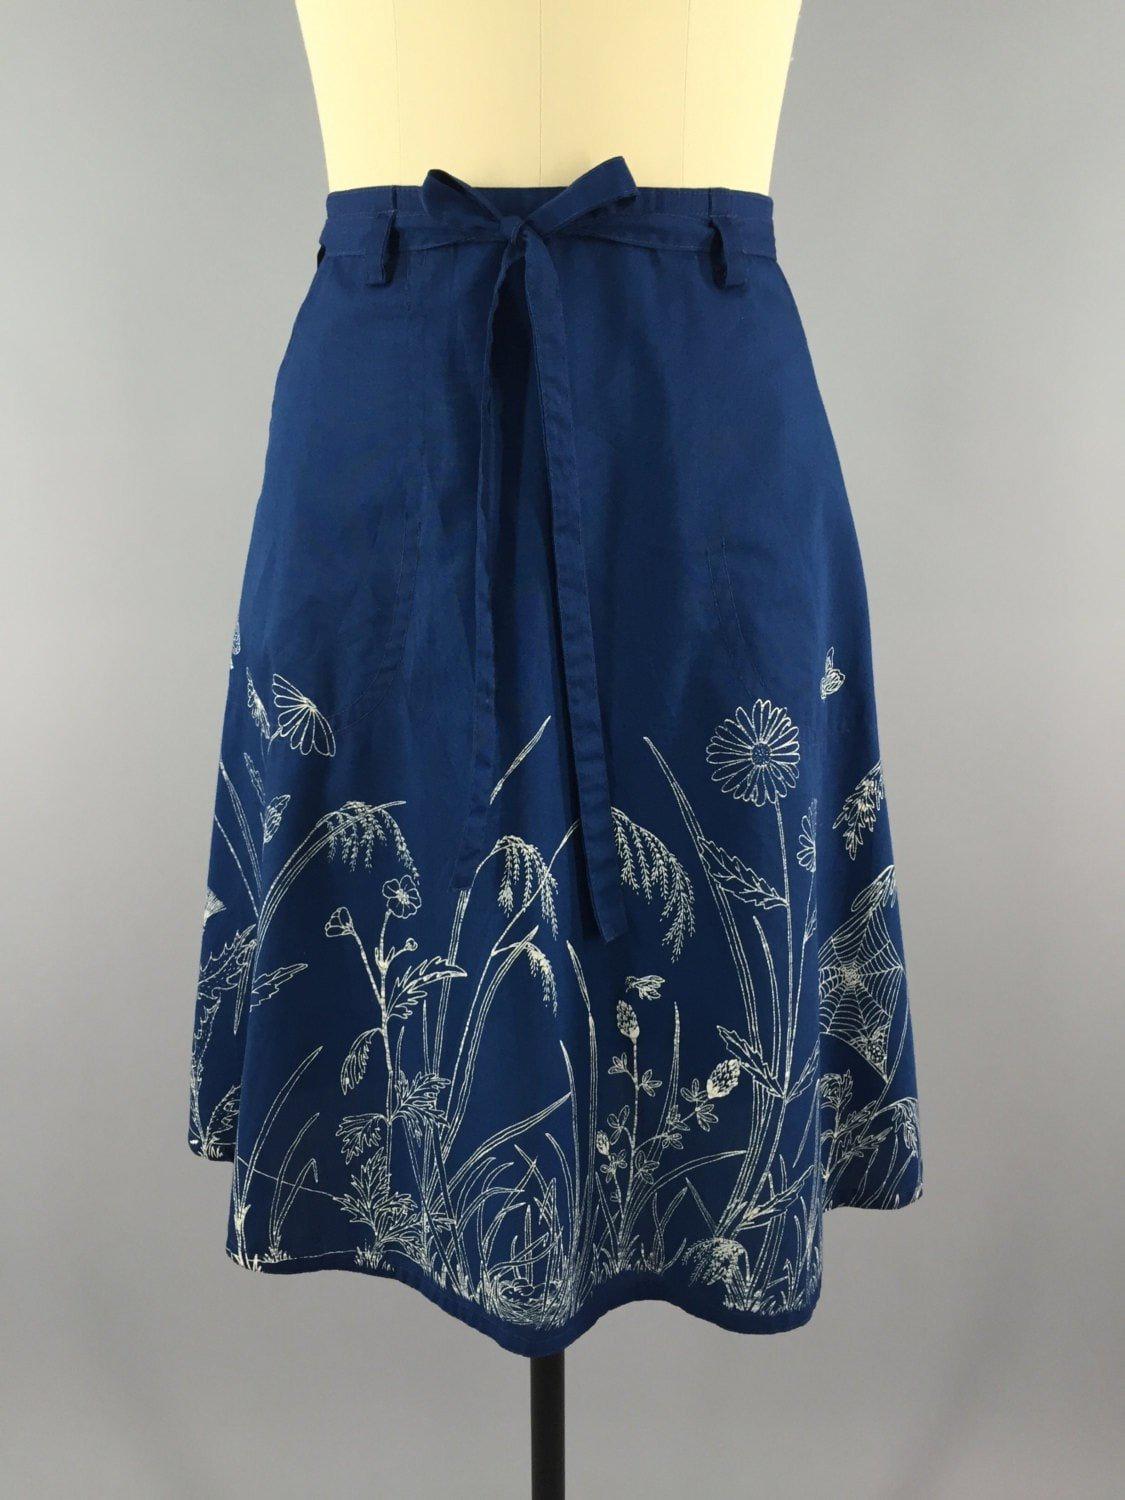 Vintage Wrap Skirt / Blue Floral Embroidery - ThisBlueBird